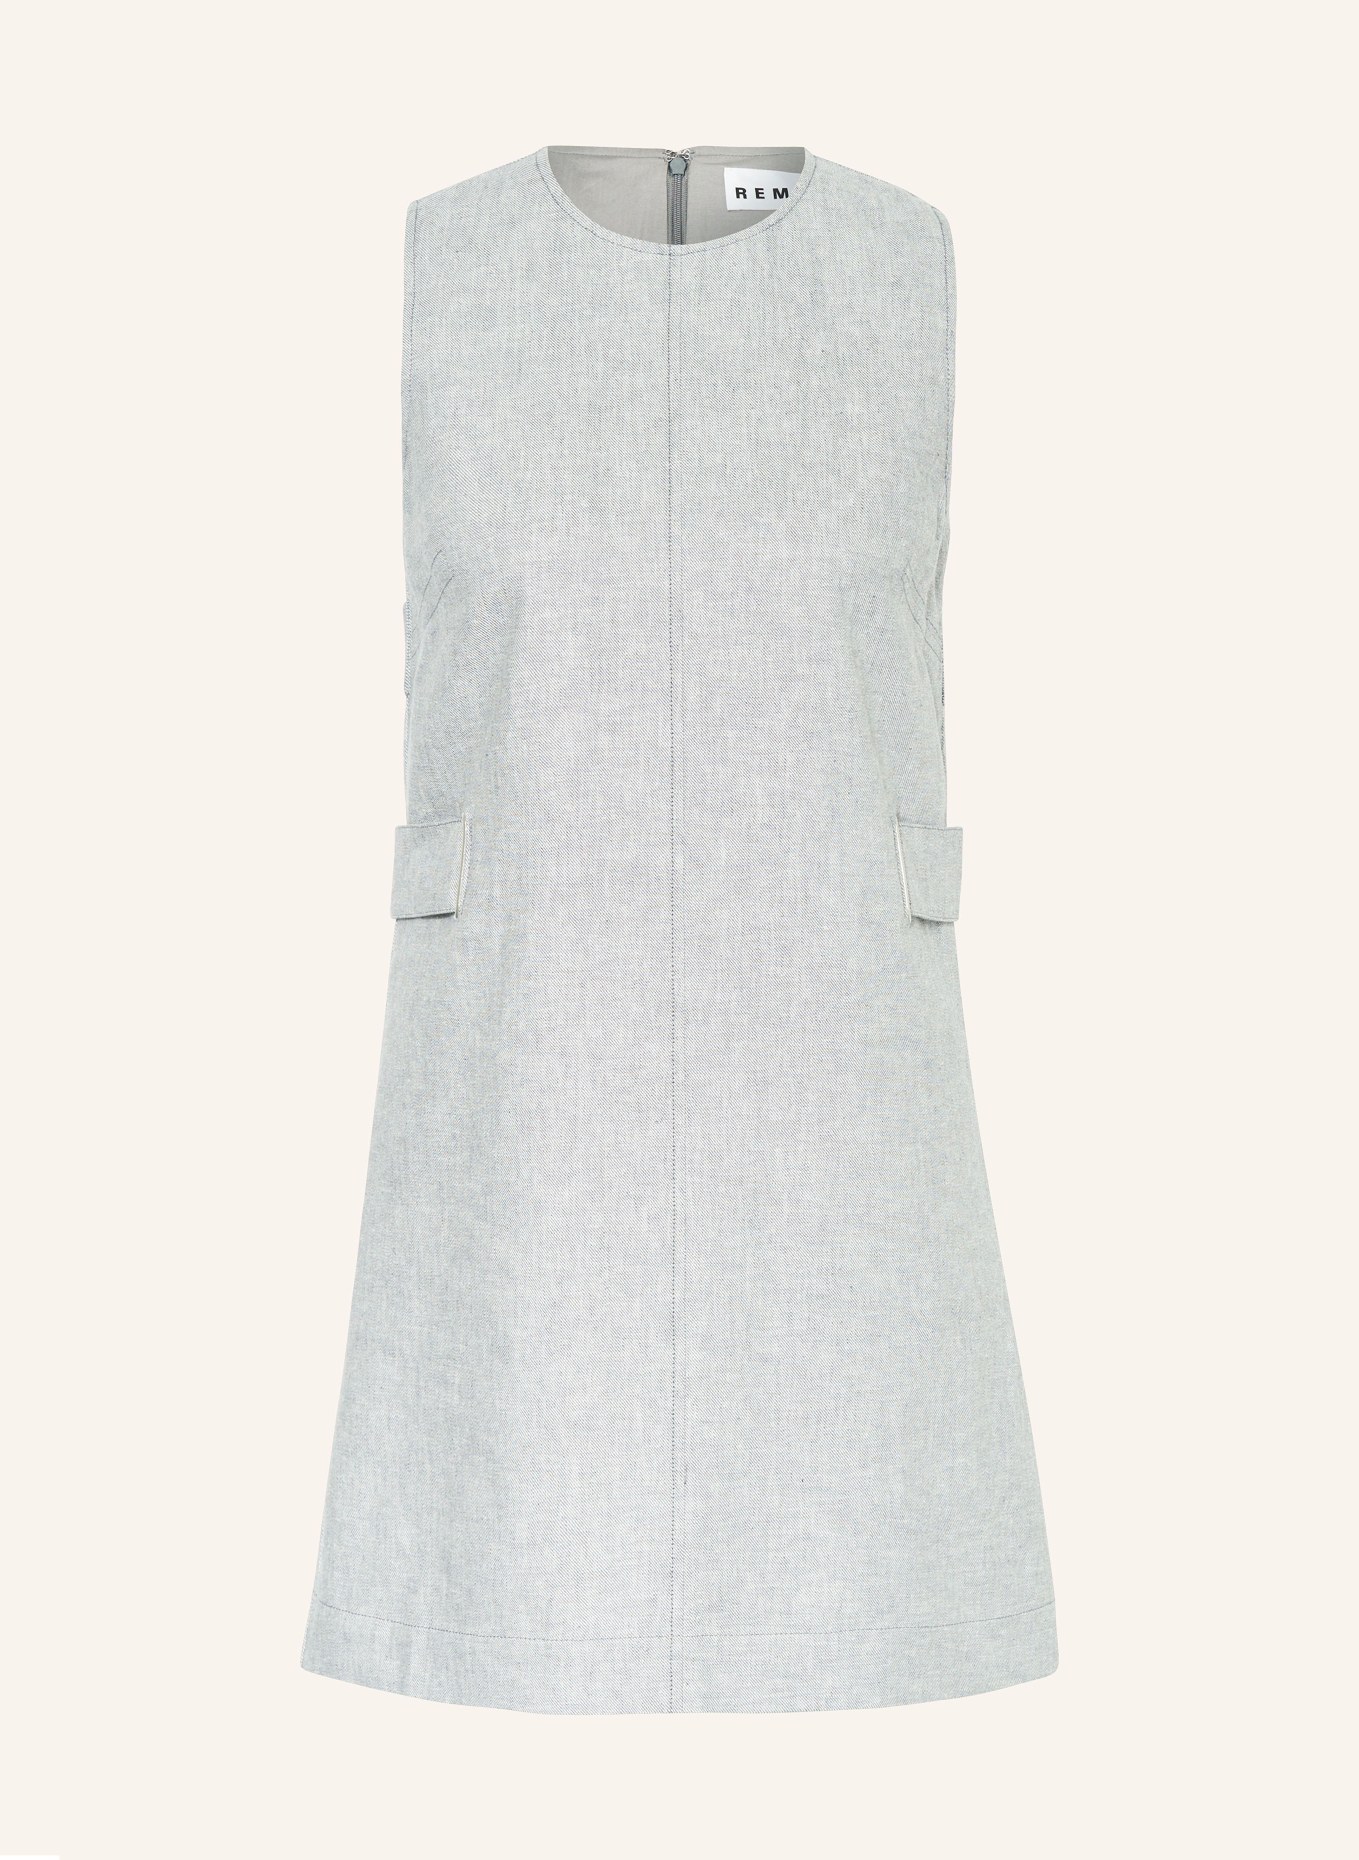 REMAIN Dress with linen, Color: GRAY/ WHITE (Image 1)